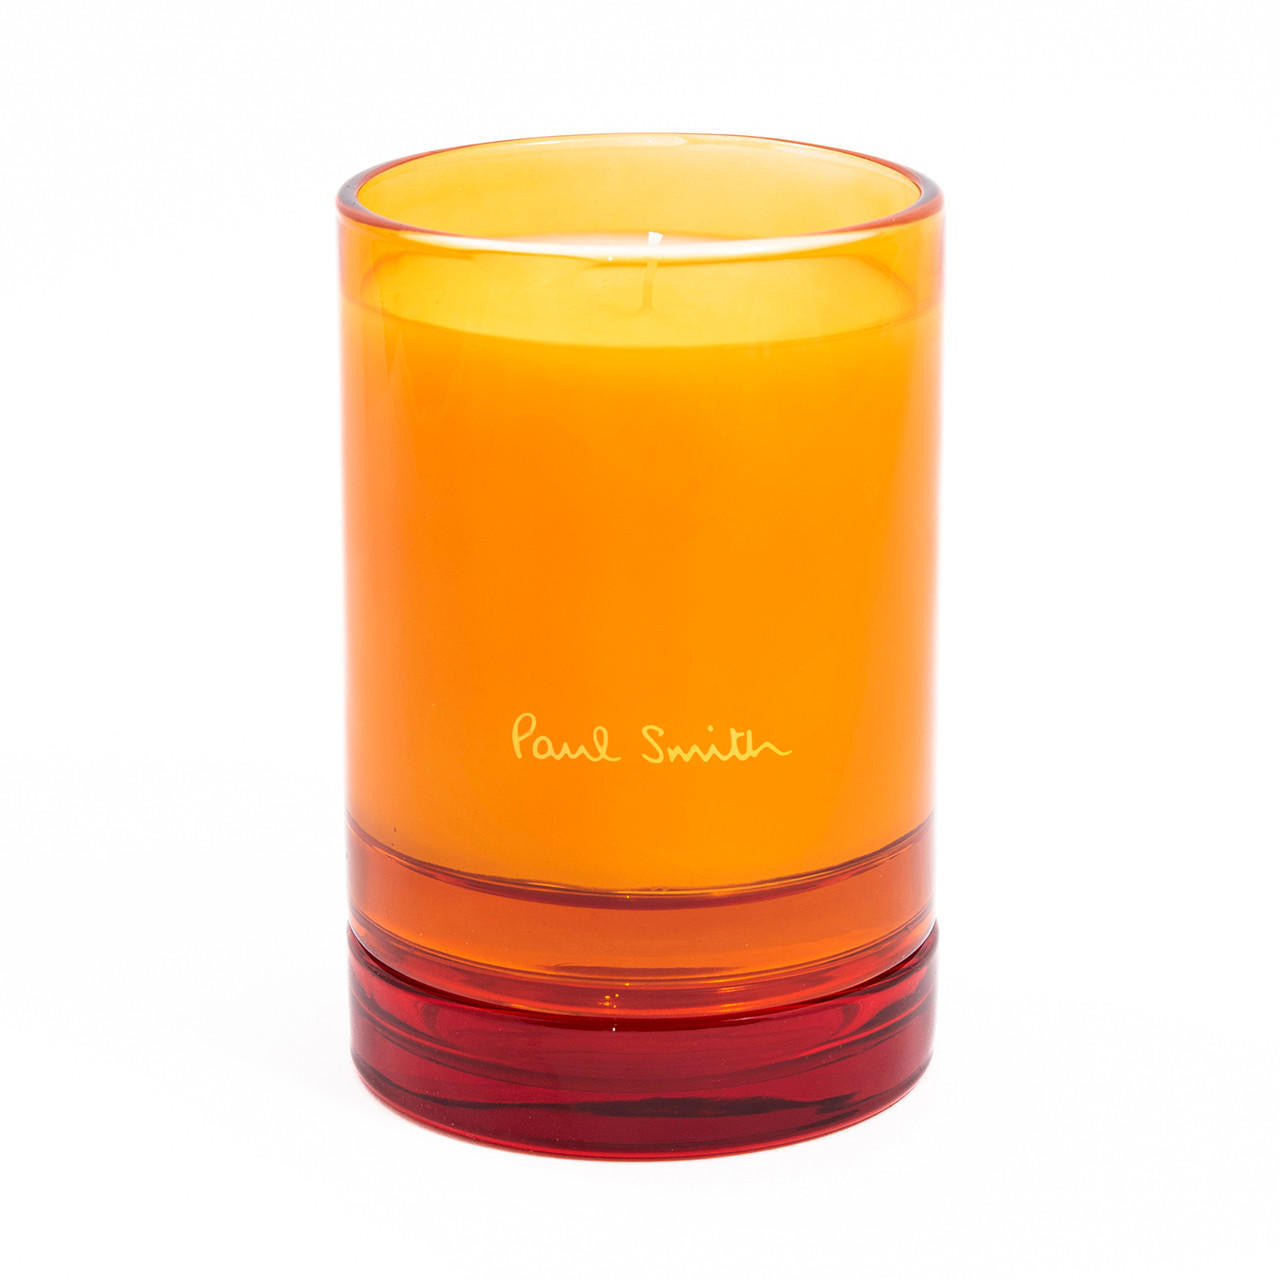  Paul Smith Bookworm 240g Candle 